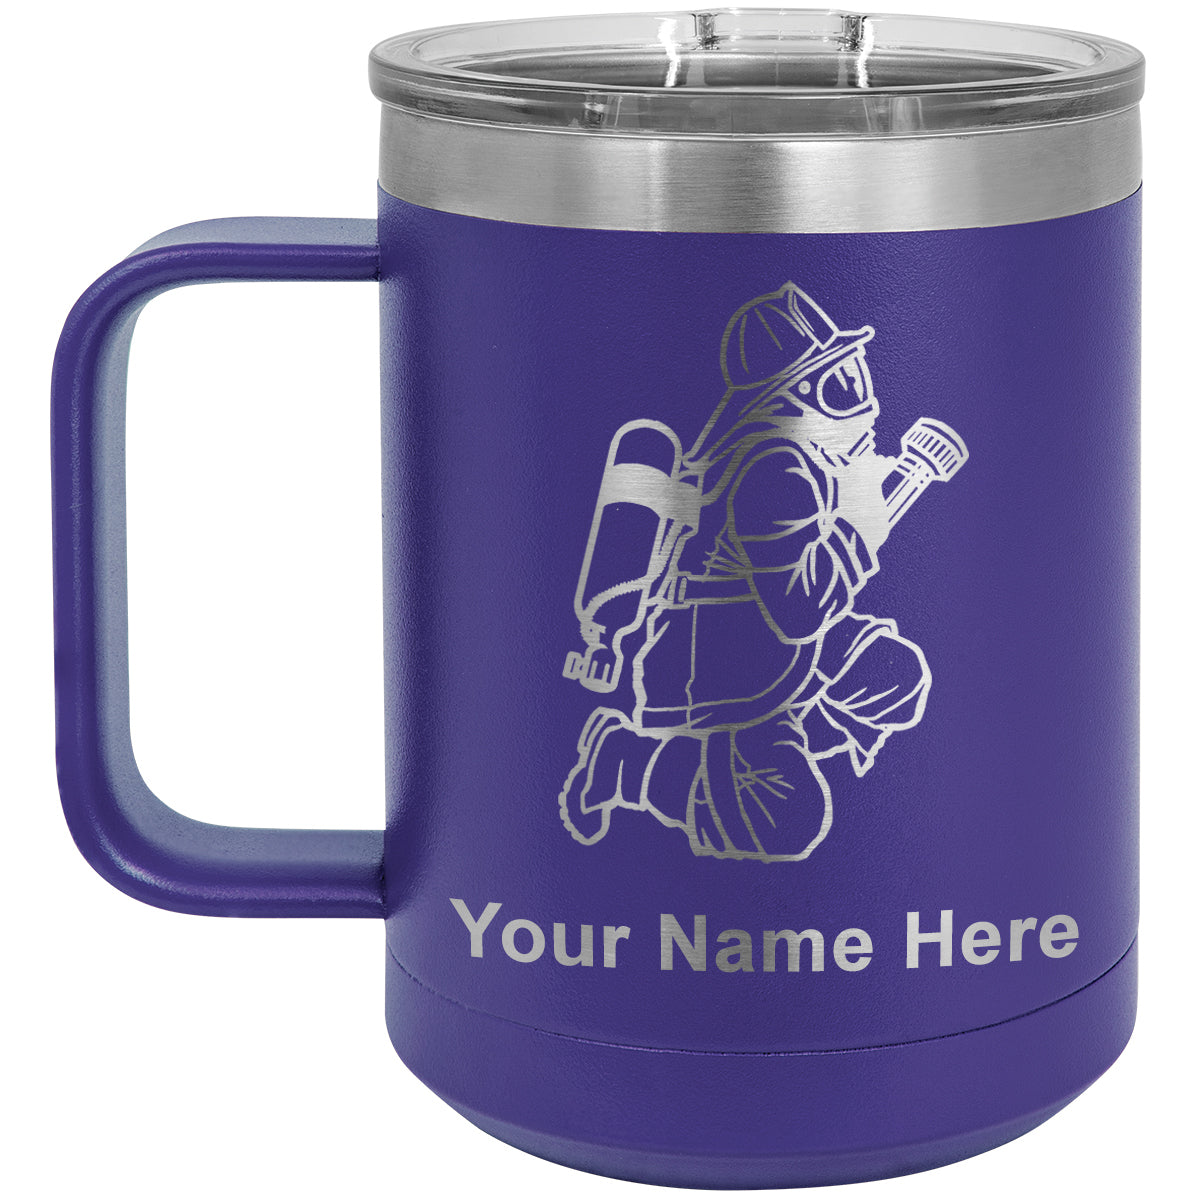 15oz Vacuum Insulated Coffee Mug, Fireman with Hose, Personalized Engraving Included